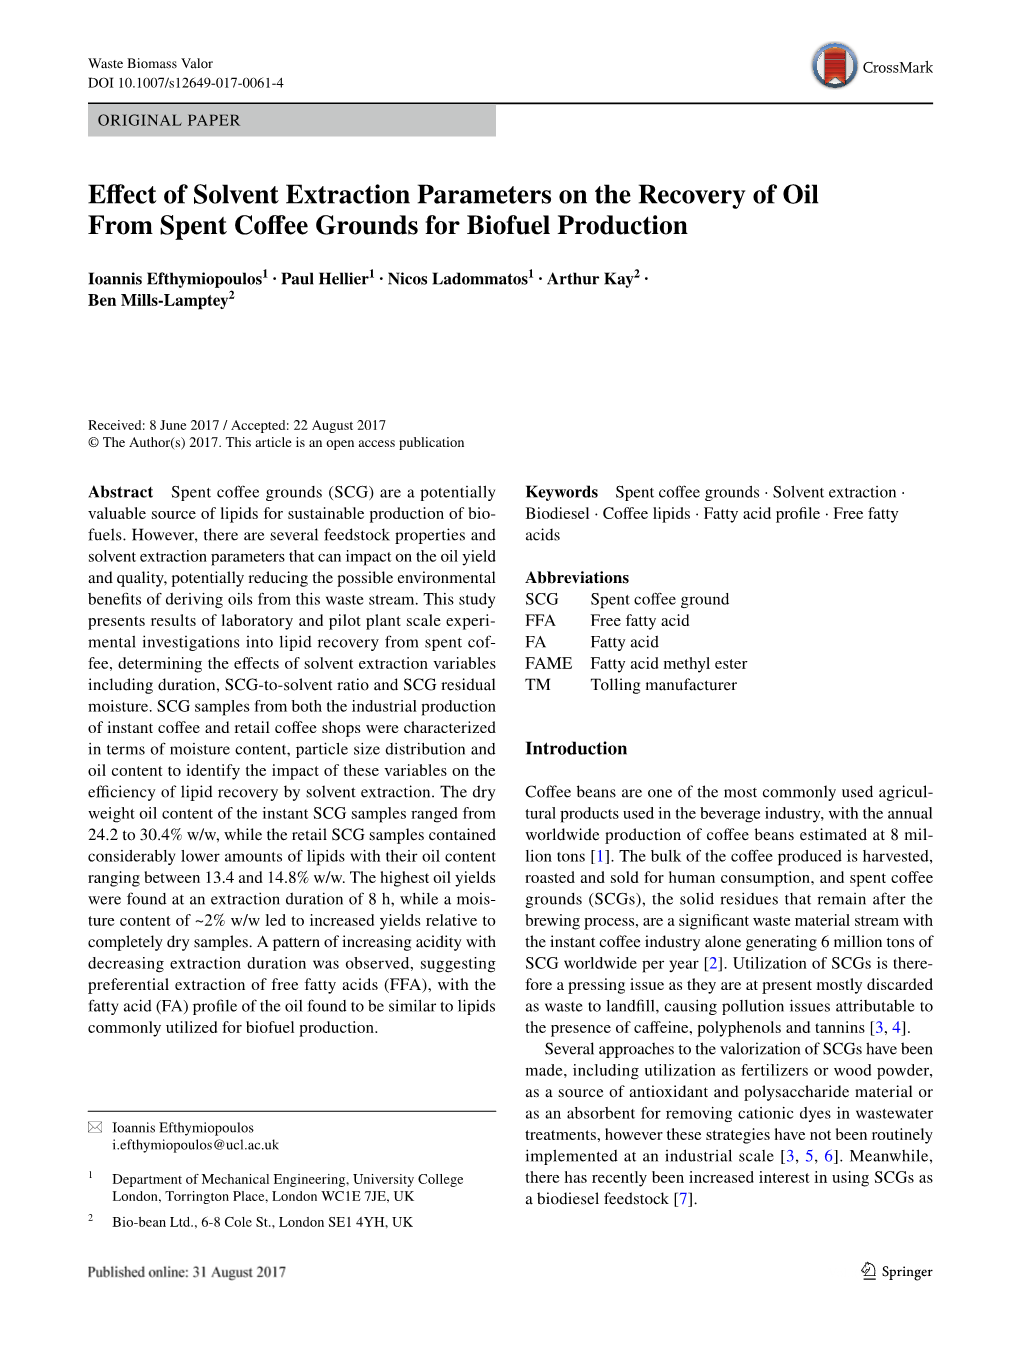 Effect of Solvent Extraction Parameters on the Recovery of Oil from Spent Coffee Grounds for Biofuel Production